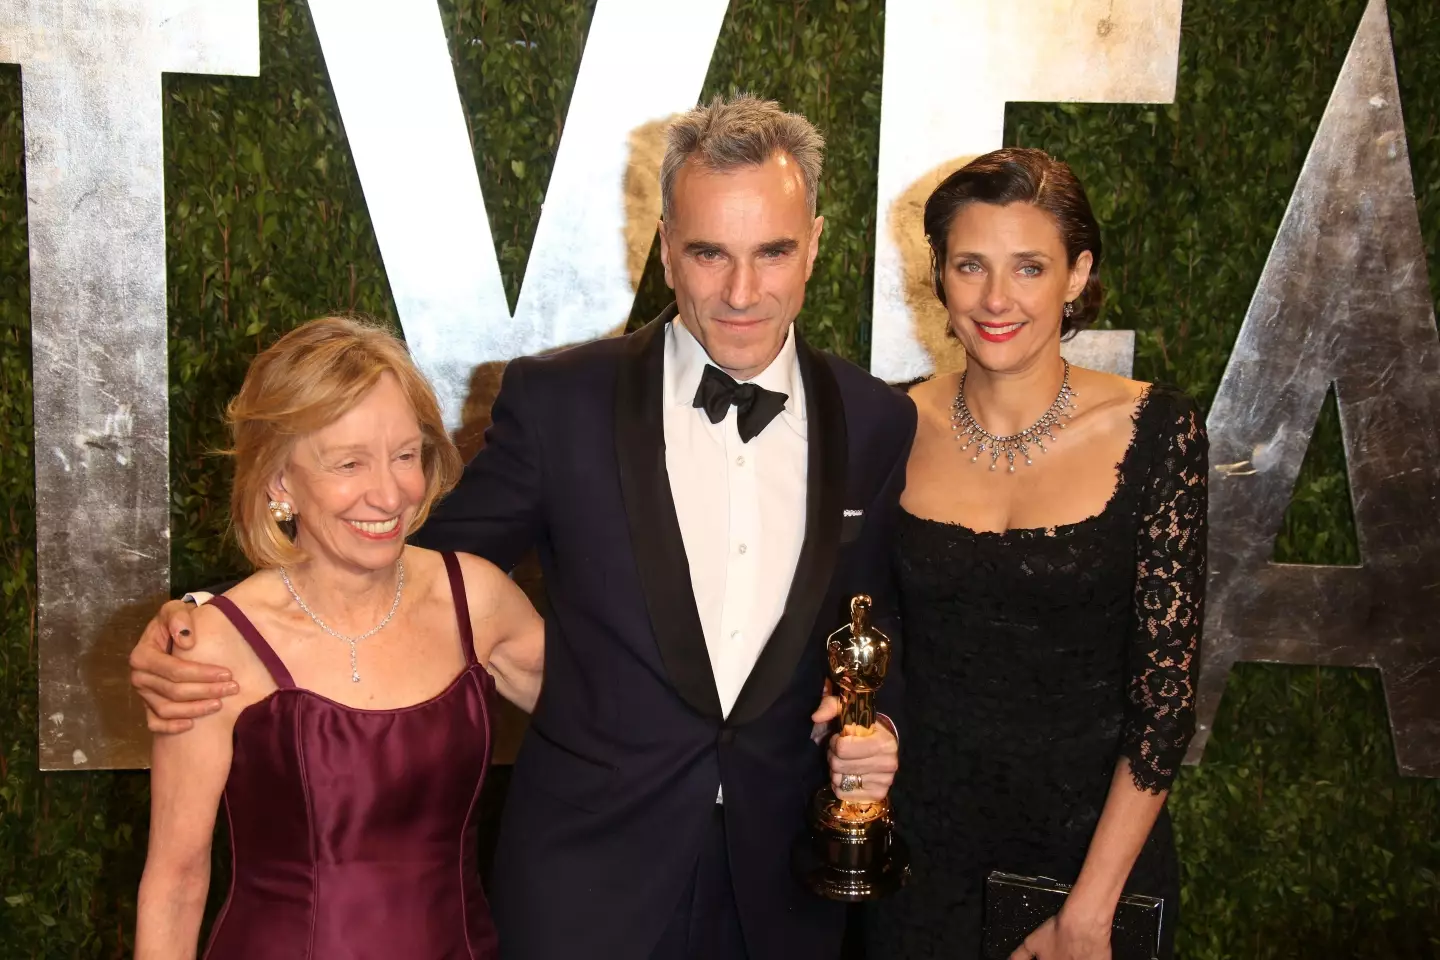 Method acting can bag you the big awards, as Daniel Day-Lewis can attest.